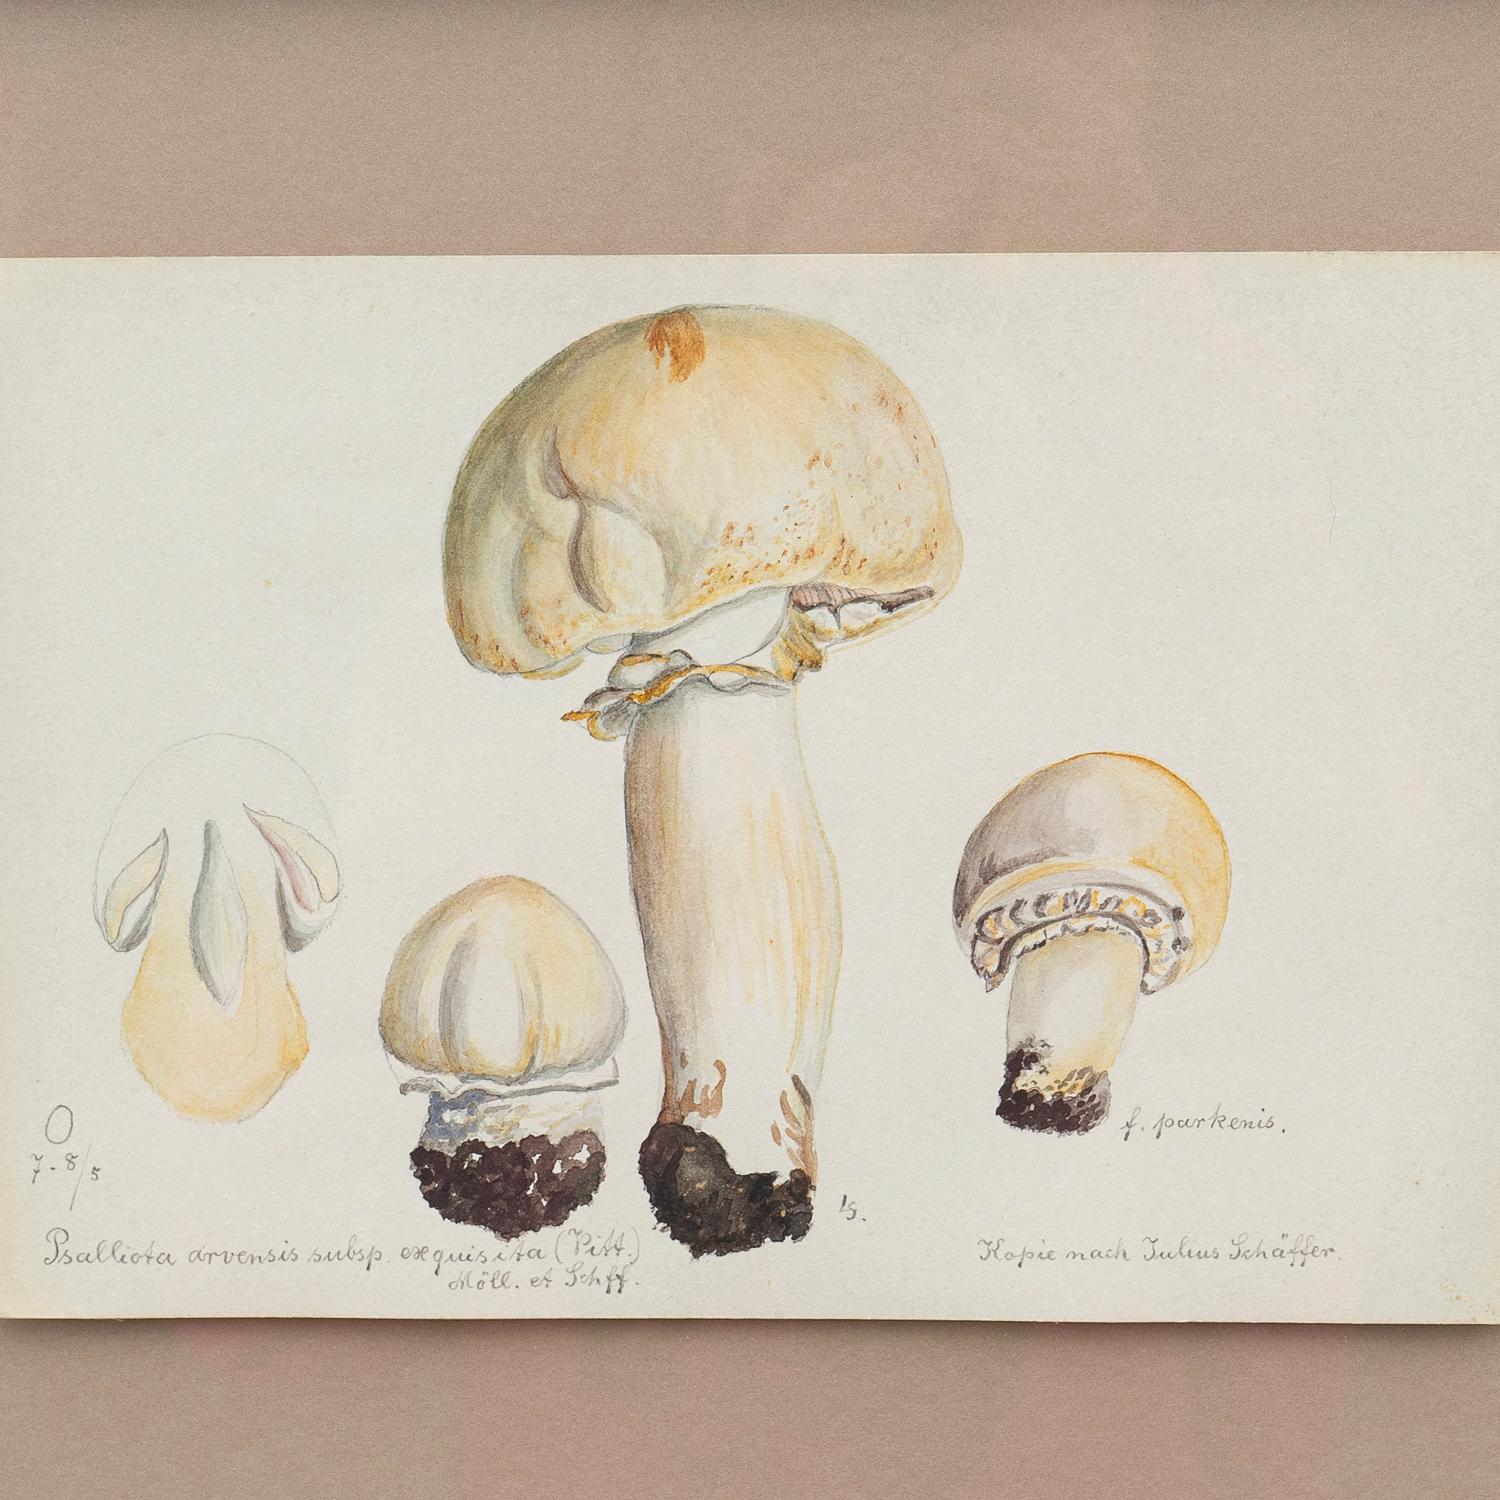 Original Mycology Watercolour Depicting a Horse Mushroom by Julius Schäffer In Good Condition For Sale In Bristol, GB